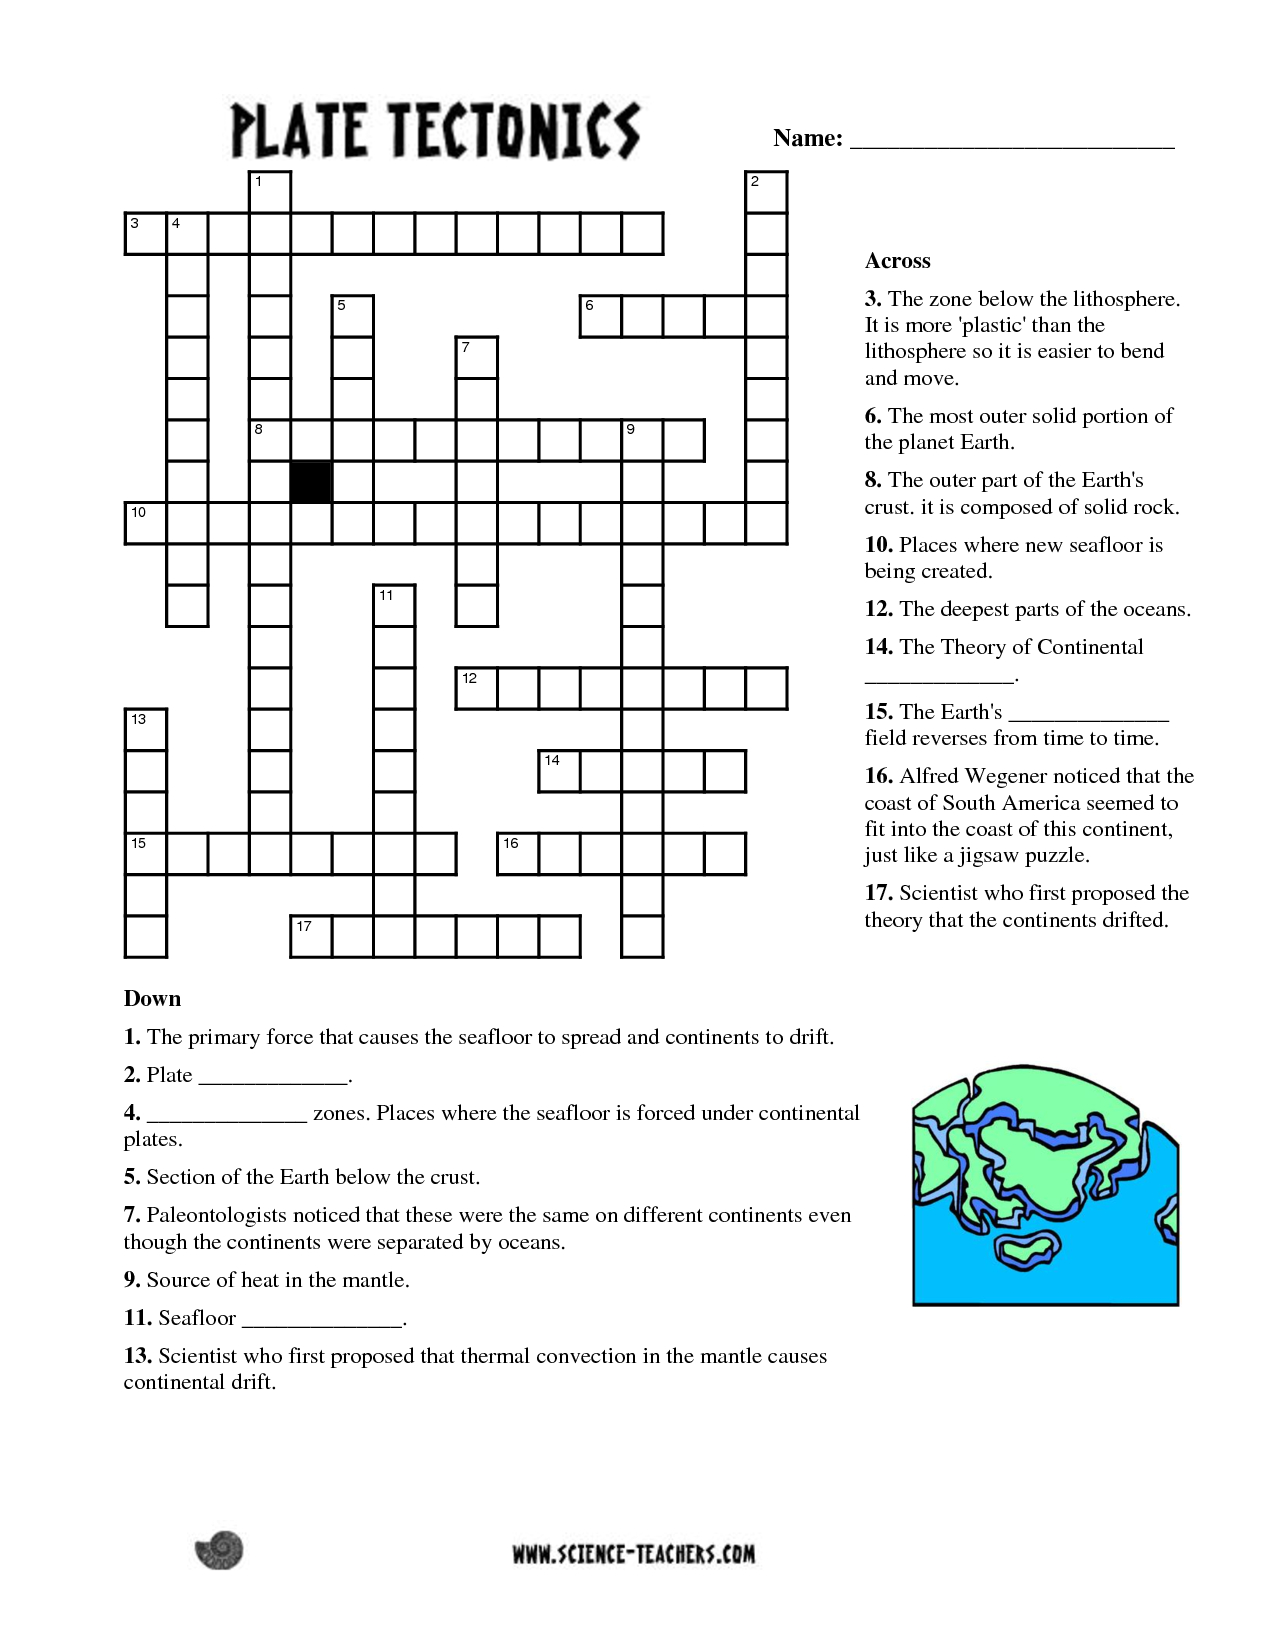 Planets Crossword Puzzle Worksheet - Pics About Space | Fun Science - Printable Science Puzzle